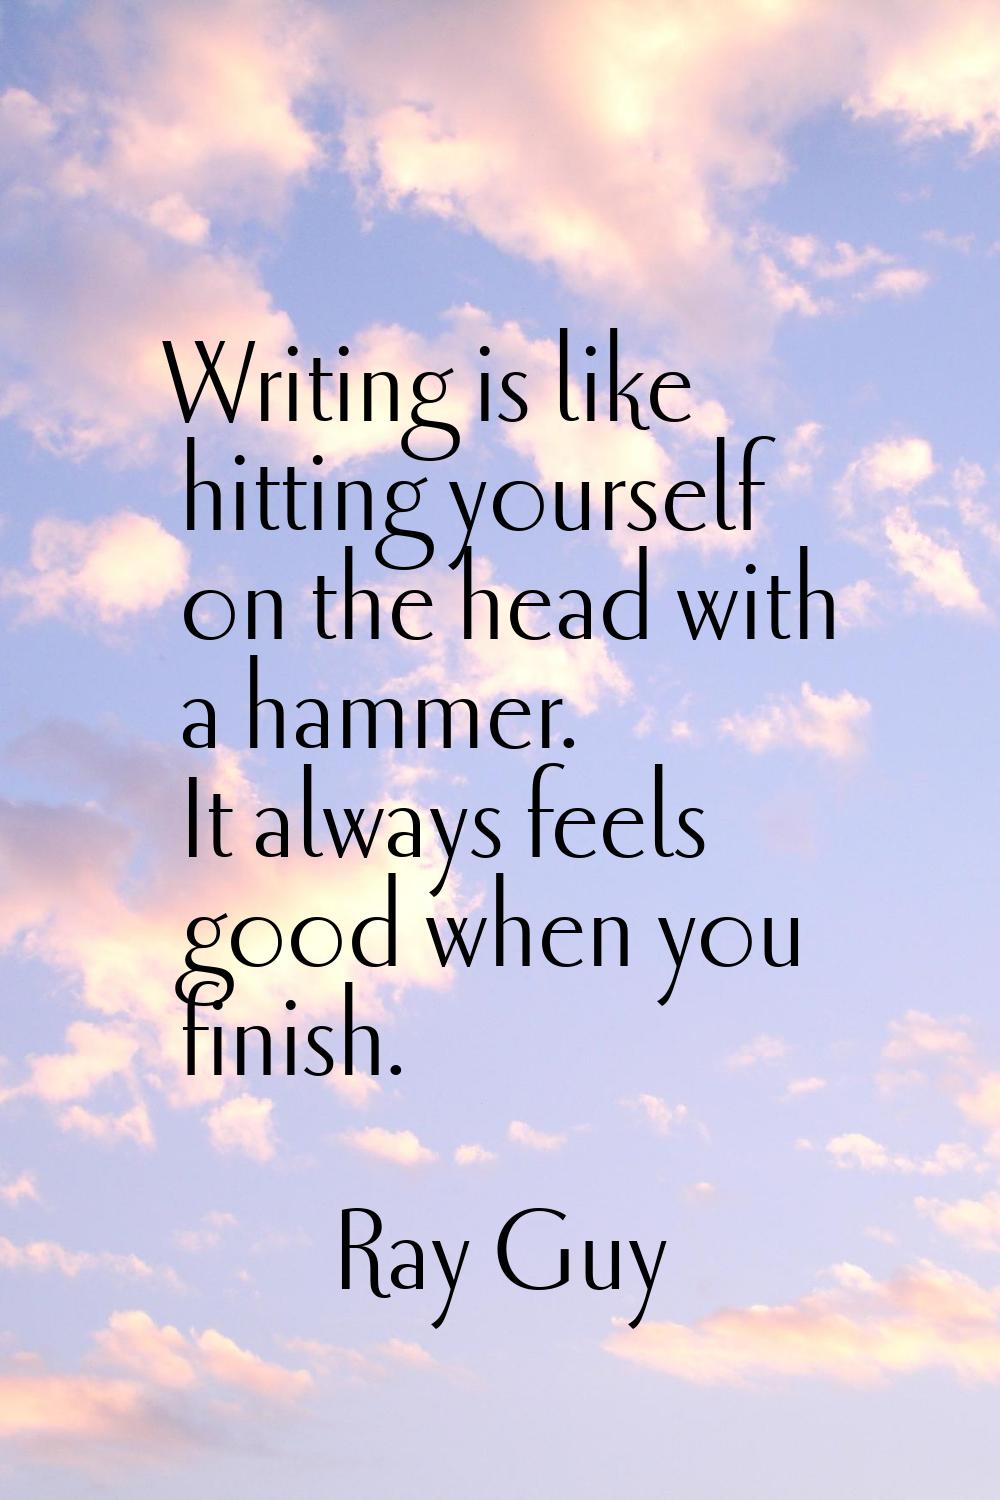 Writing is like hitting yourself on the head with a hammer. It always feels good when you finish.